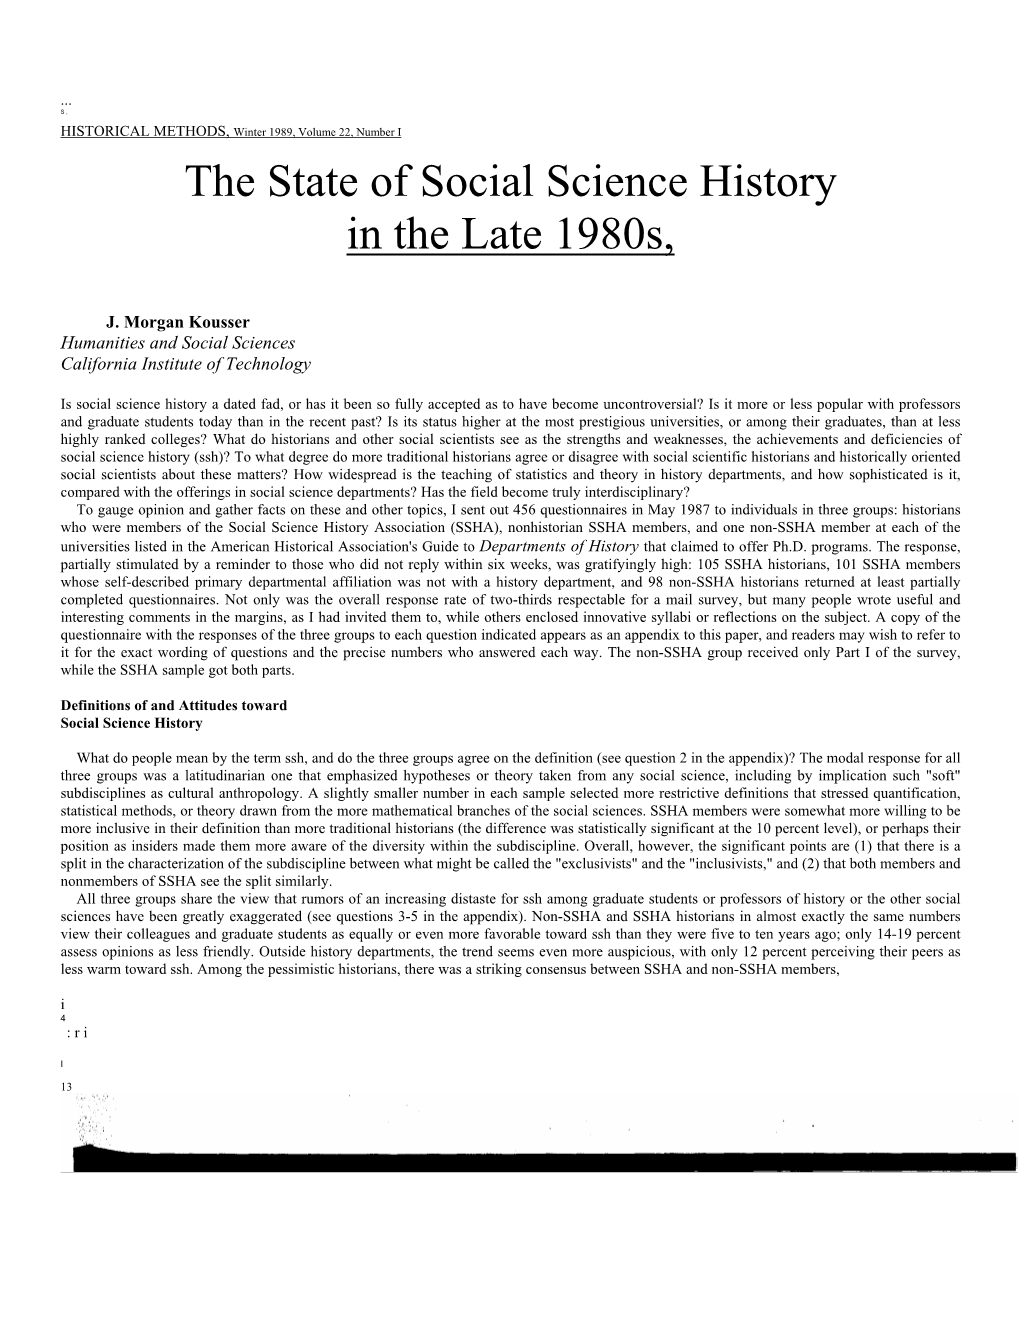 The State of Social Science History in the Late 1980S